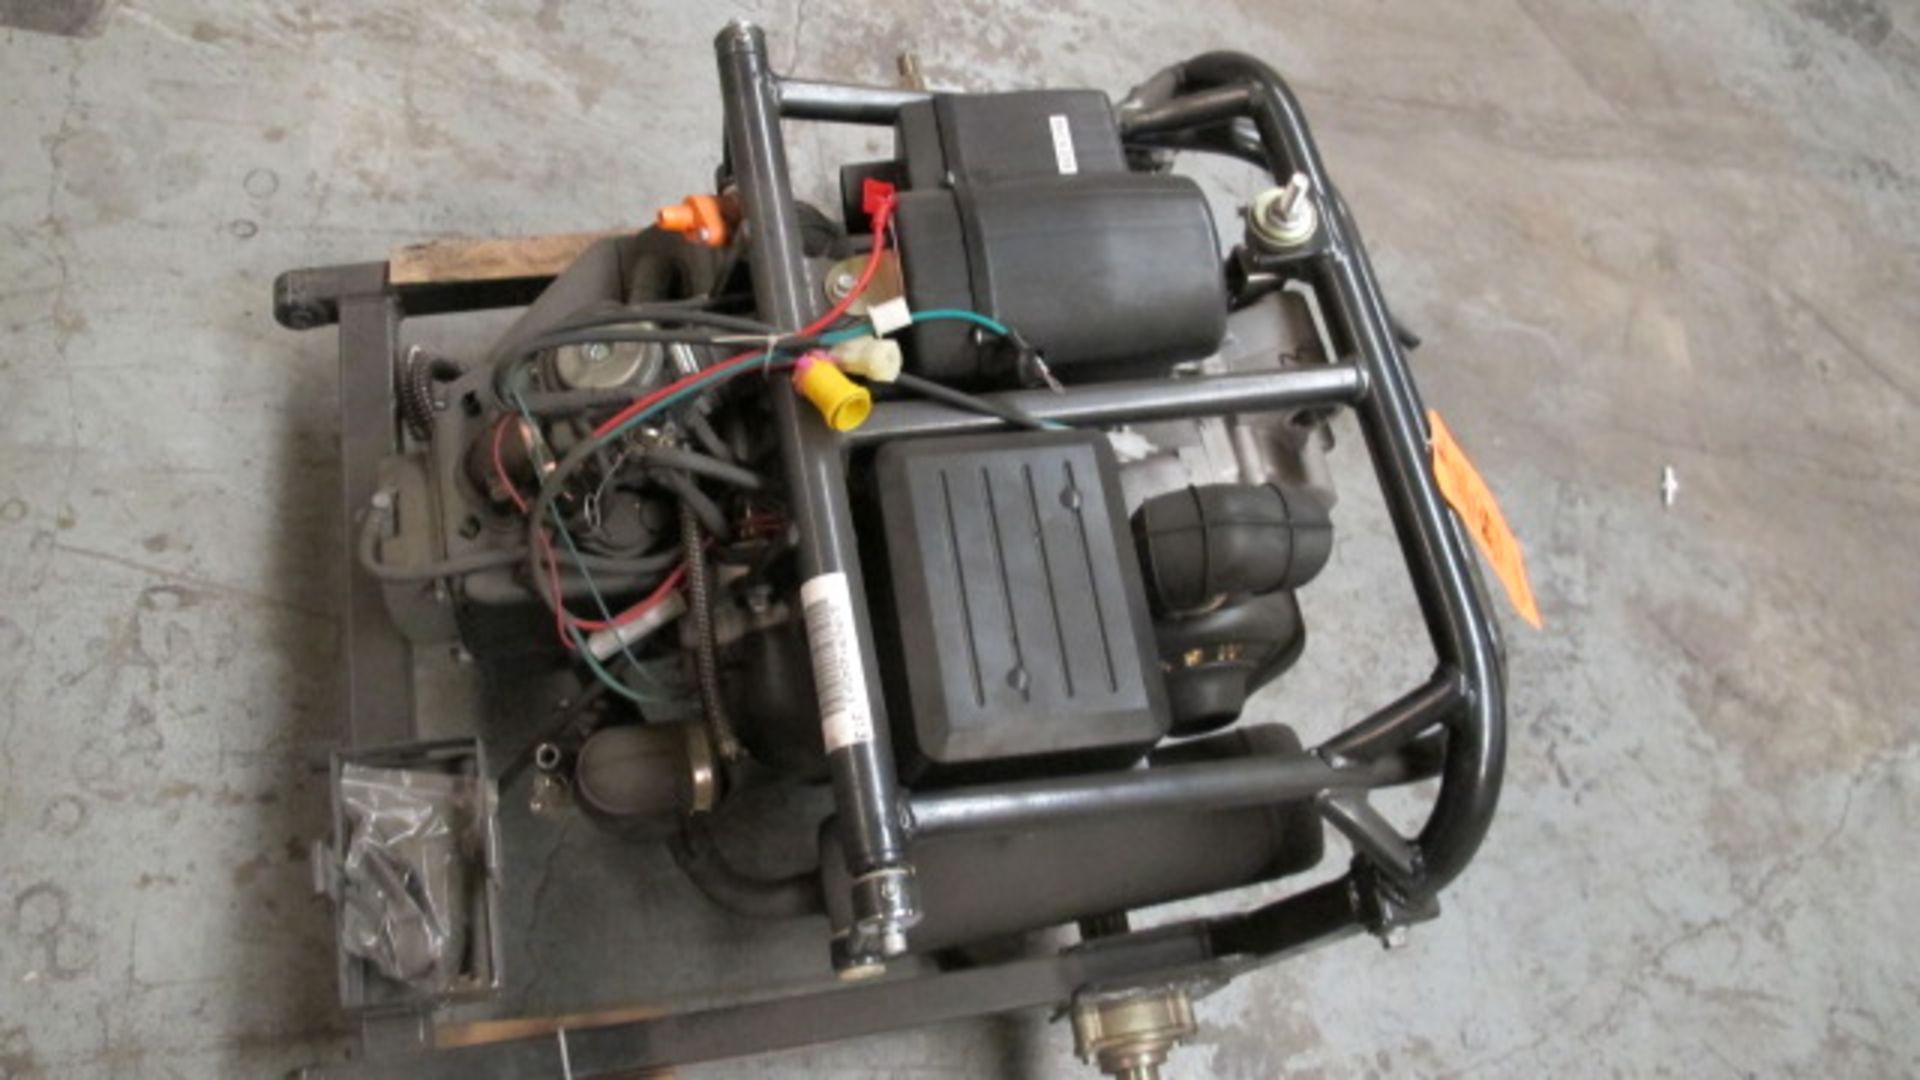 150CC ENGINE (PARTIALLY ASSEMBLED) MANUFACTURED BY: ZHEJIANG JINLANG ENGINE CO. LTD